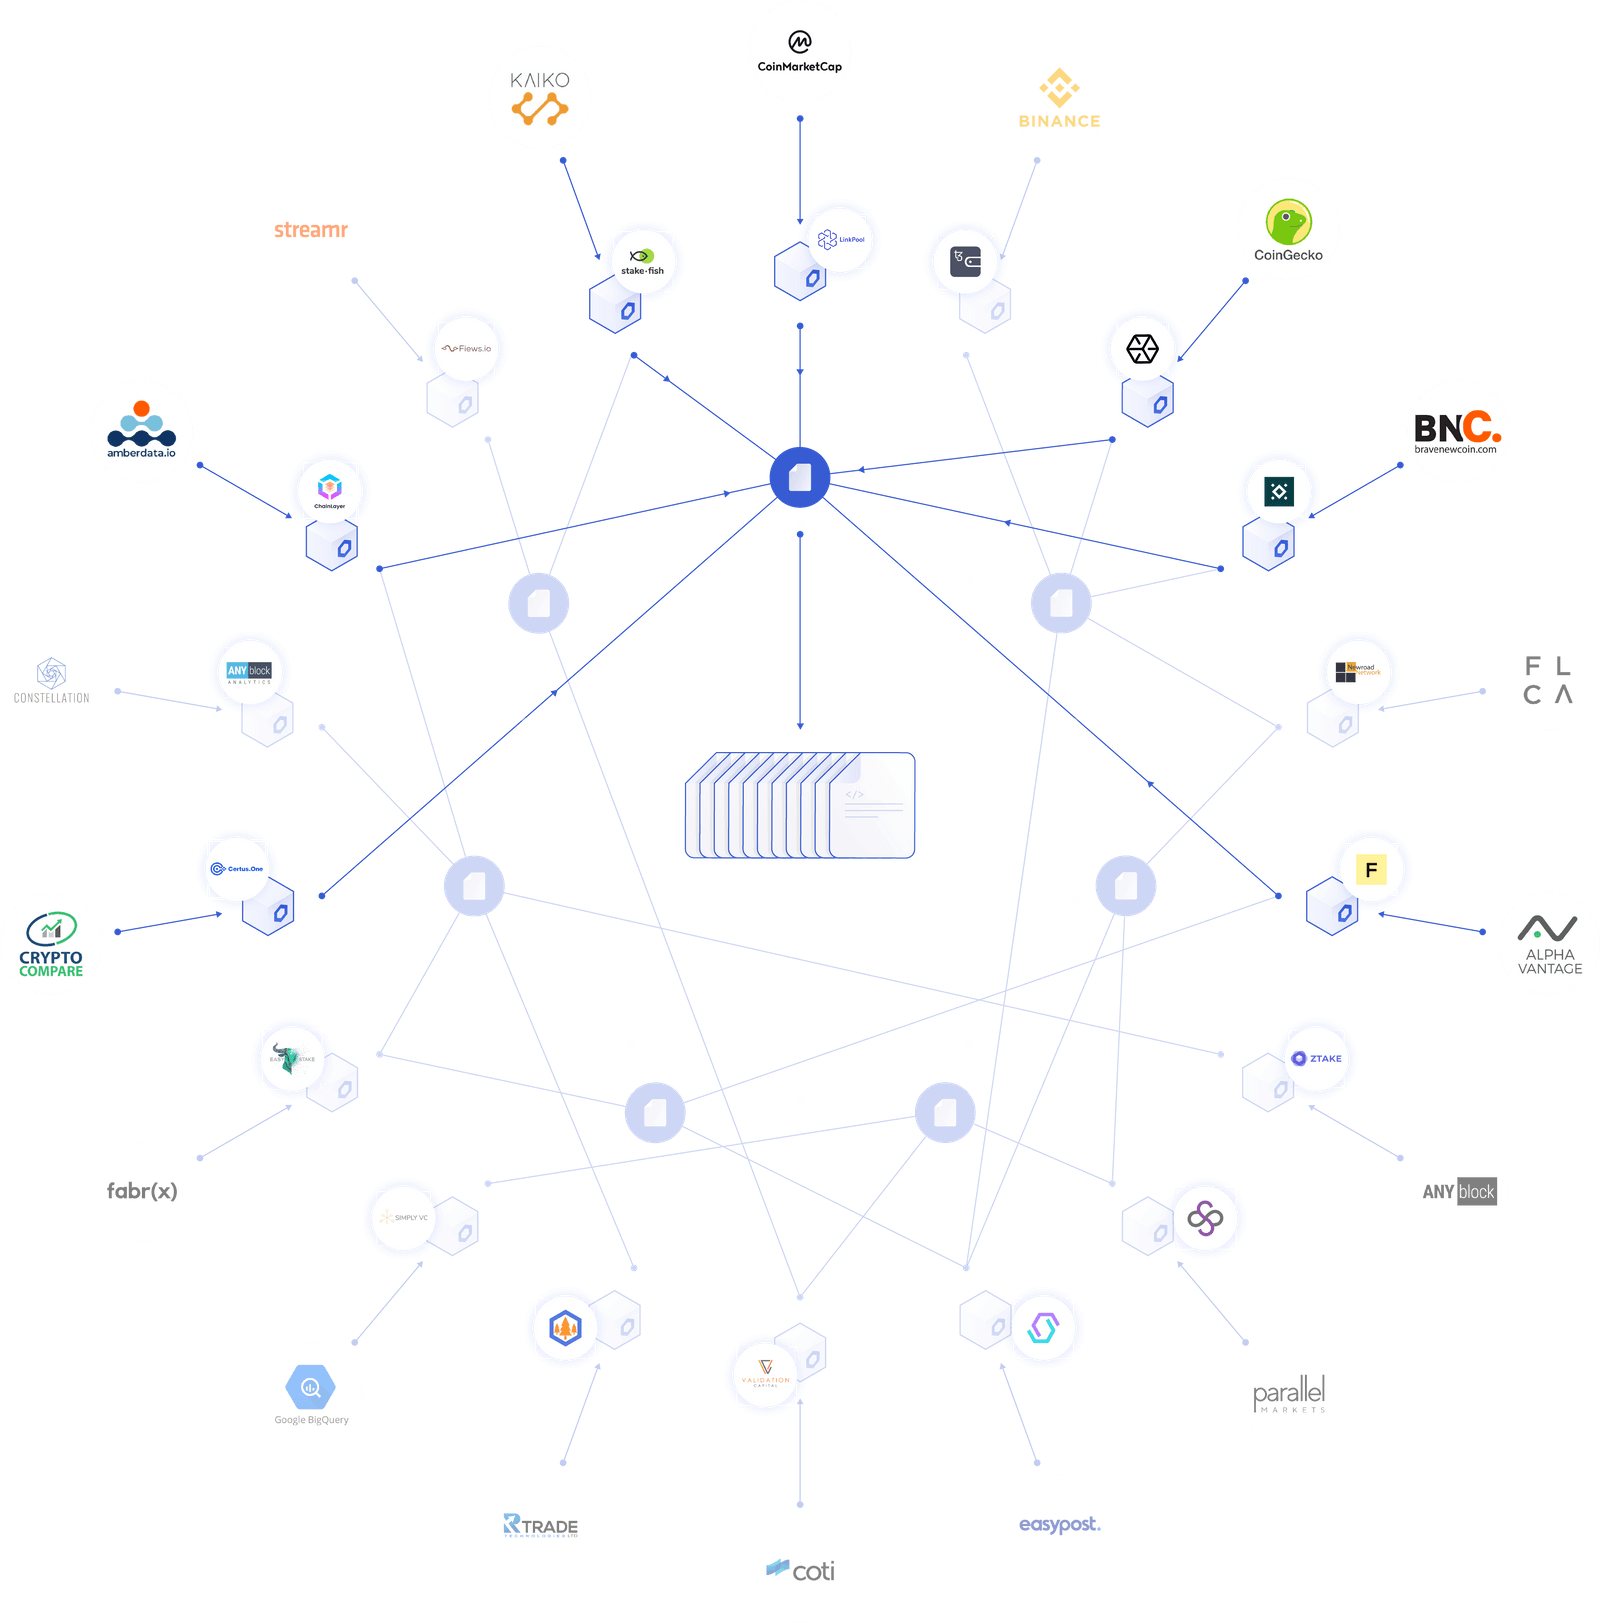 A diagram showing various node operators and data sources.